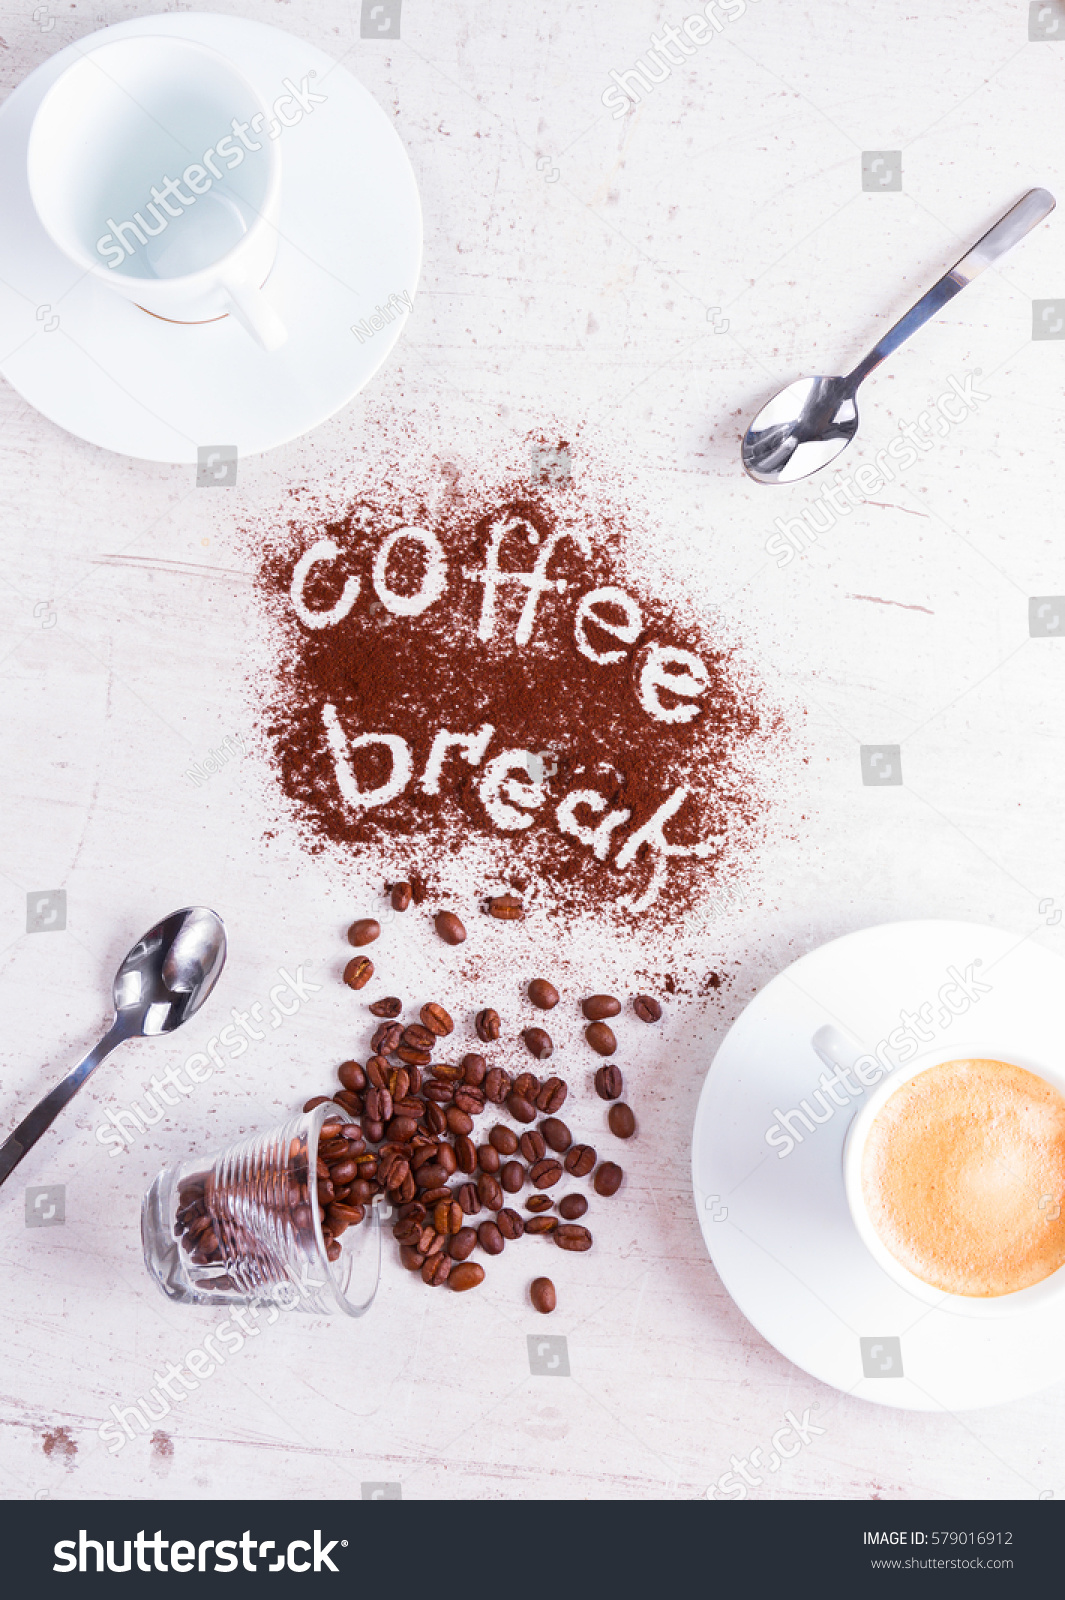 coffee break concept - empty cup and cup of espresso with coffee break lettering #579016912